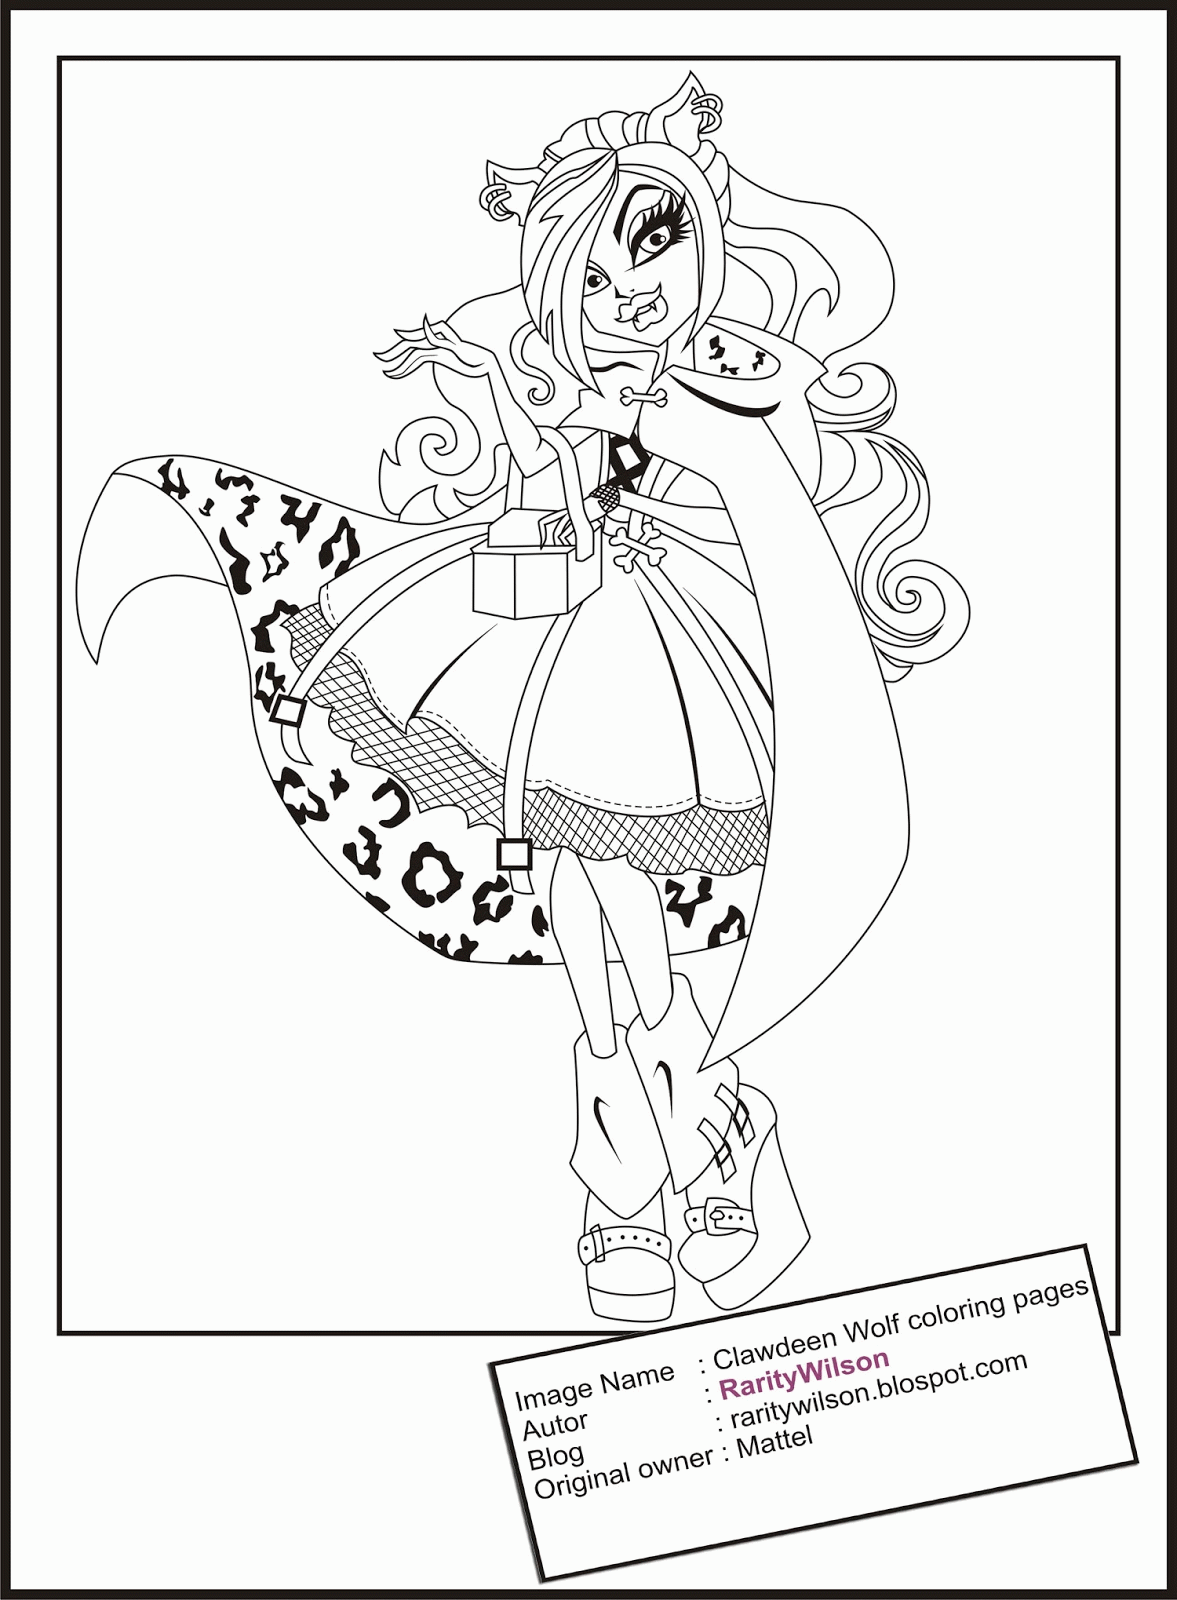 Unique Comics Animation: ultimate monster high coloring pages